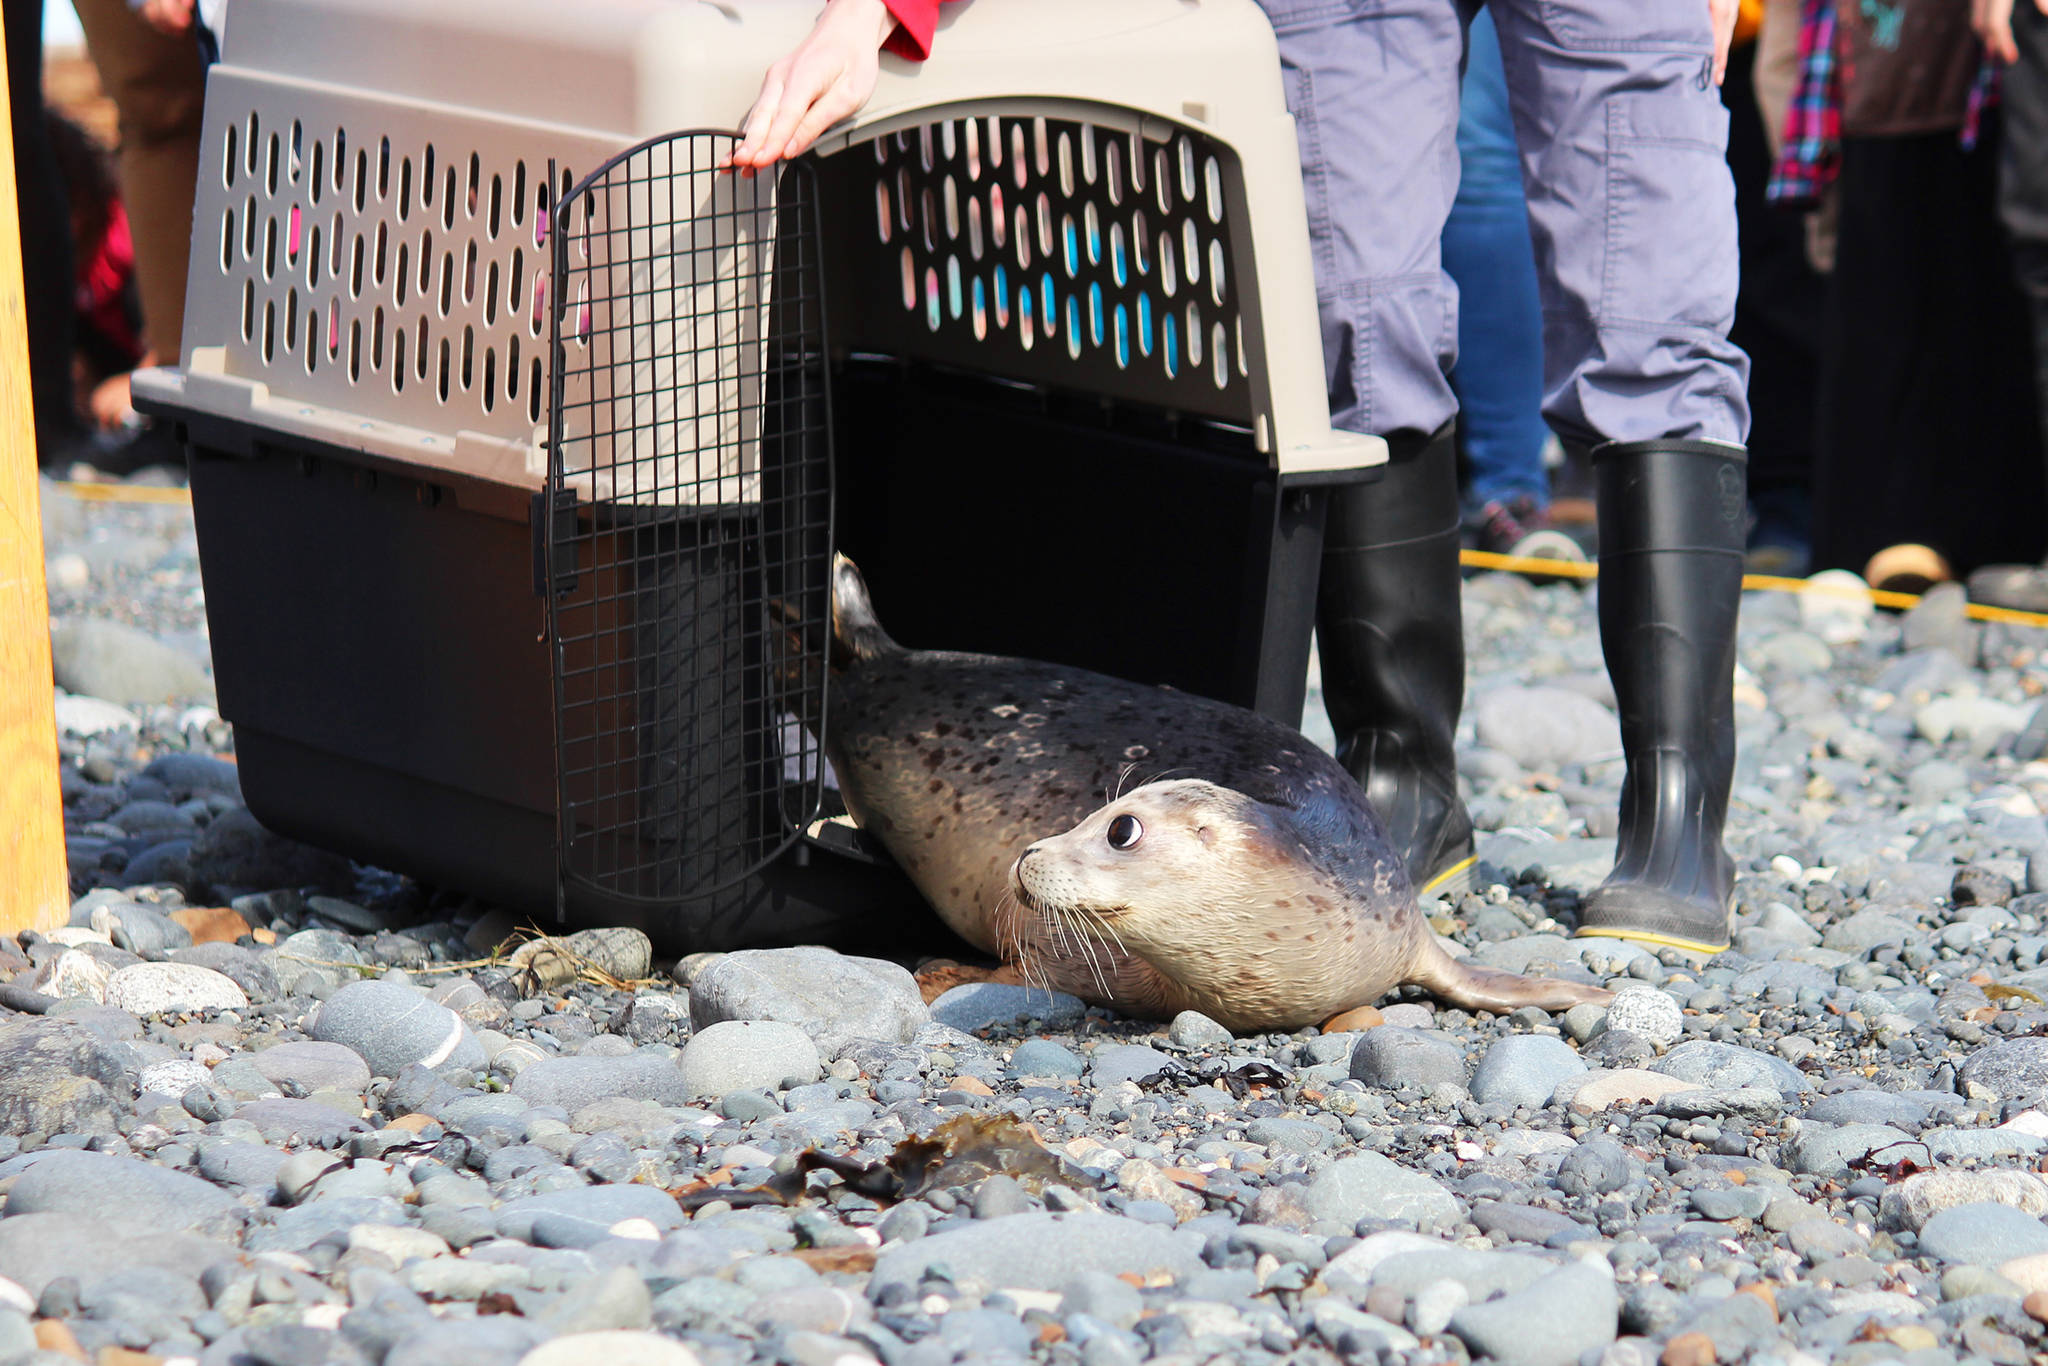 Alaska SeaLife Center volunteers release a harbor seal back into the wild in Kachemak Bay on Thursday, Sept. 5, 2019 at Bishop’s Beach in Homer, Alaska. The center released two seals which were found neglected on Homer area beaches this May and were rehabilitated through the Wildlife Response Program. (Photo by Megan Pacer/Homer News)